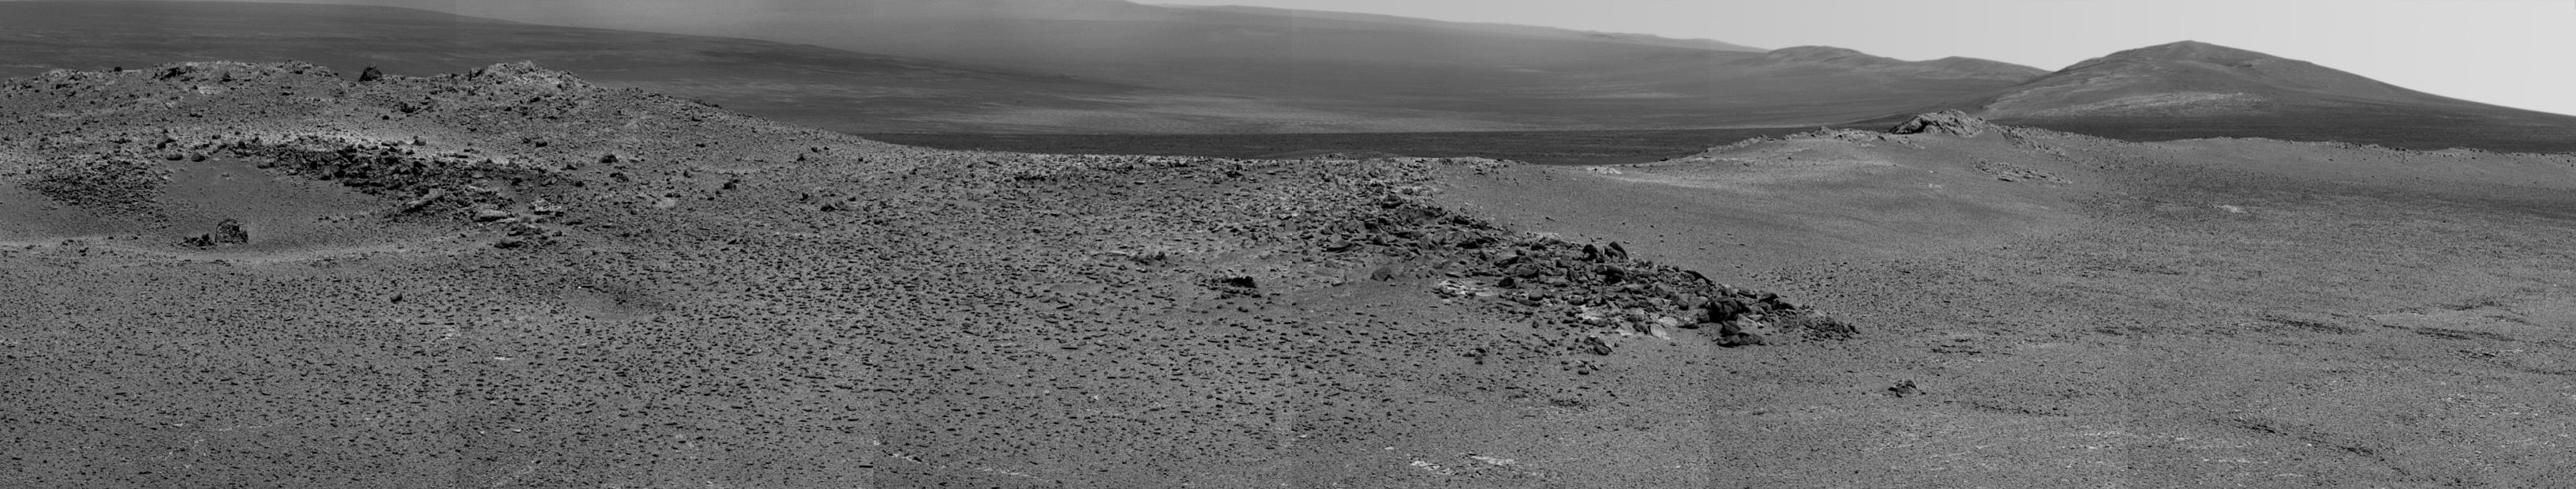 NASA's Mars Exploration Rover Opportunity used its panoramic camera (Pancam) to record this view of the rise in the foreground, called "Nobbys Head."